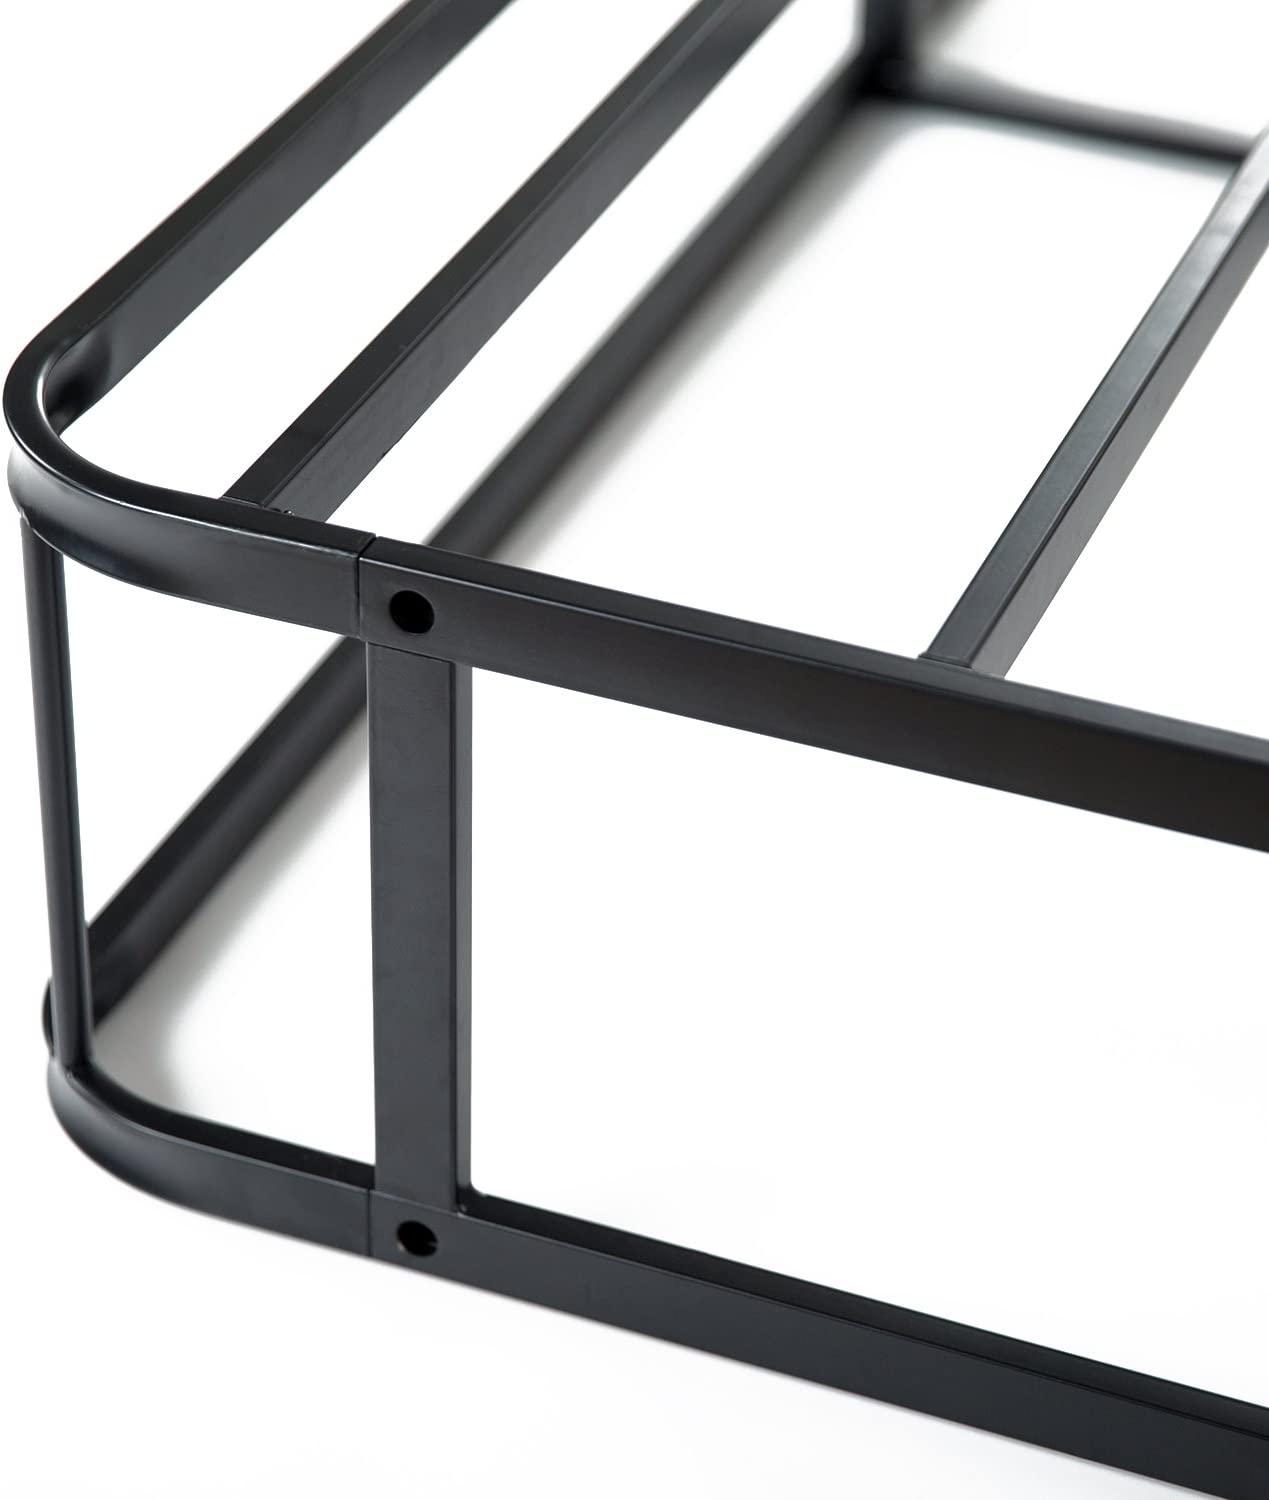 Like NEW - ZINUS 9 Inch Metal Smart Box Spring / Mattress Foundation / Strong Metal Frame / Easy Assembly, Queen - Retail $139